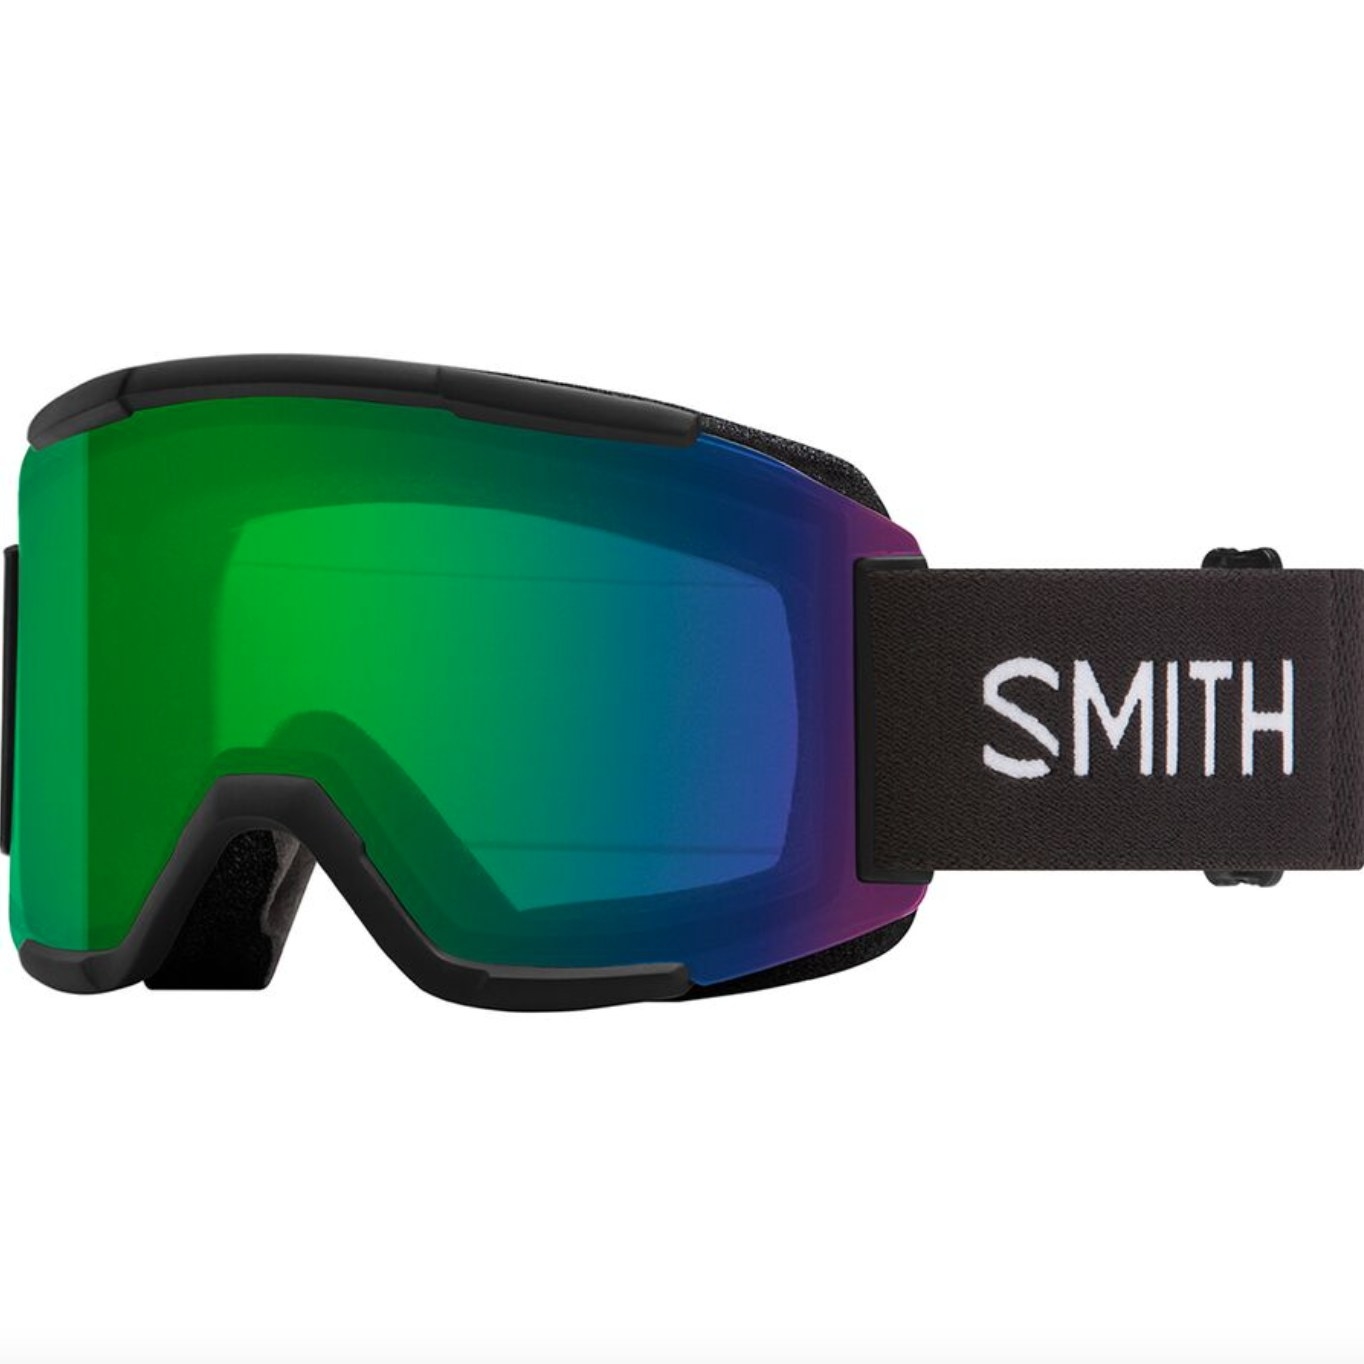 A pair of Smith squad goggles with a green mirrored lens